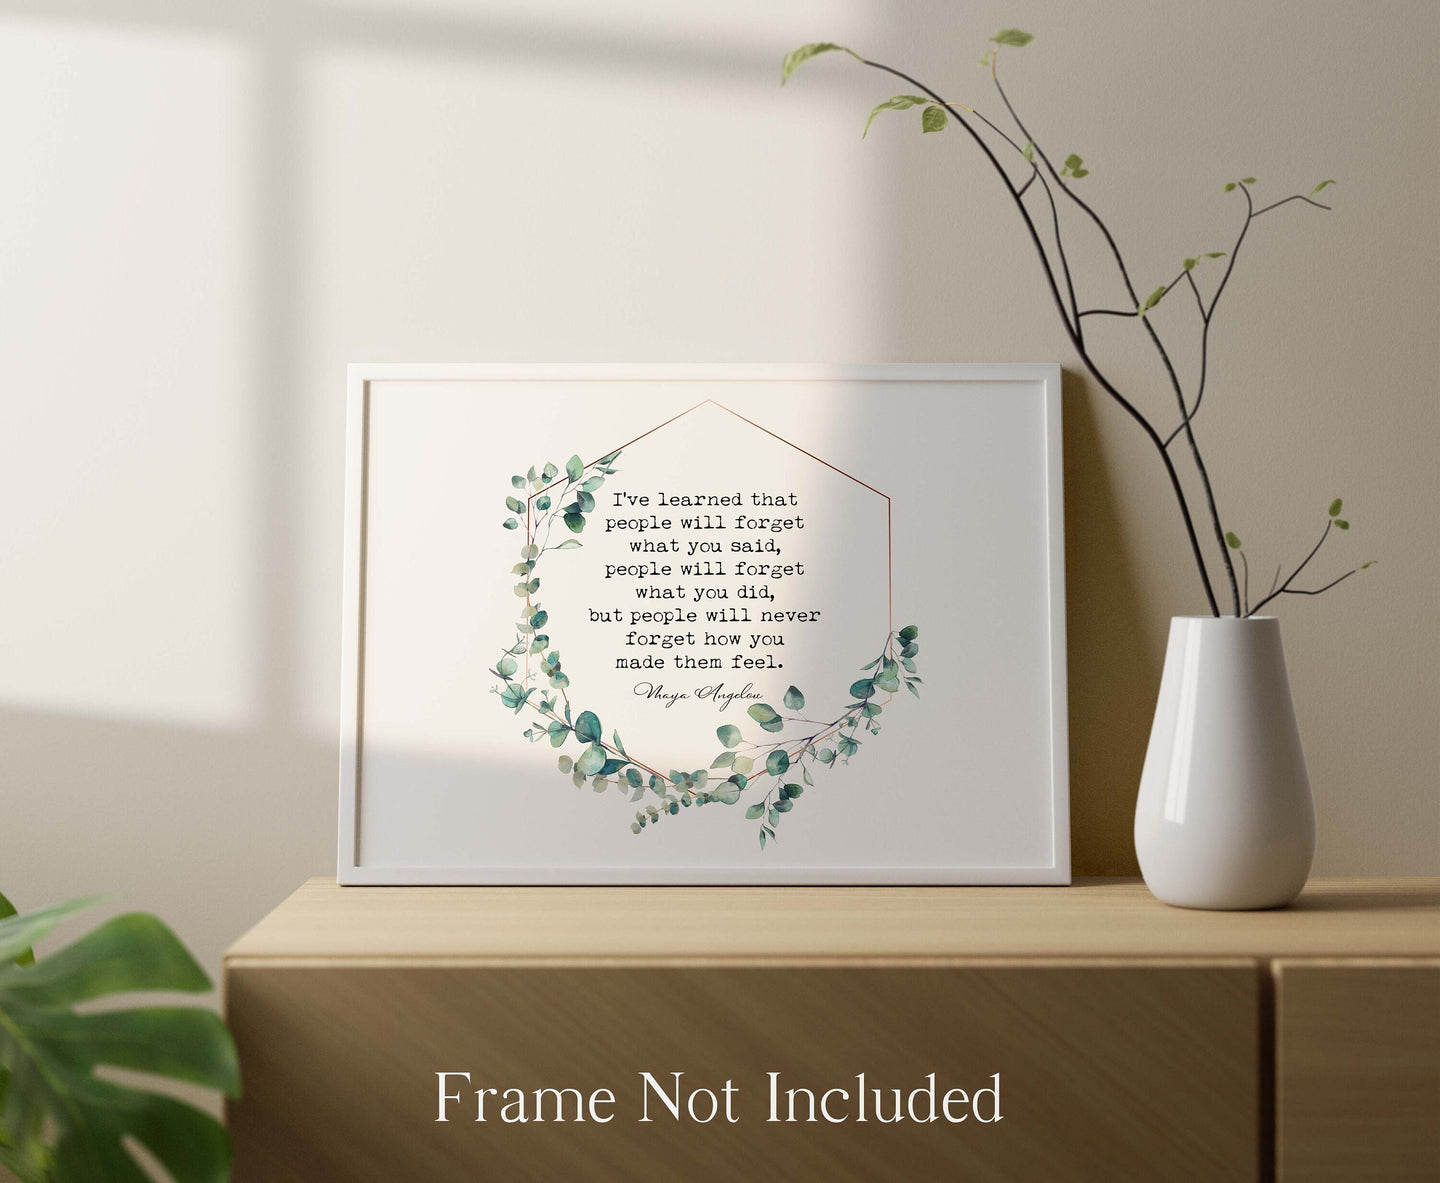 Maya Angelou Quote Print - I've learned that people will never forget how you made them feel - Physical Art Print Without Frame